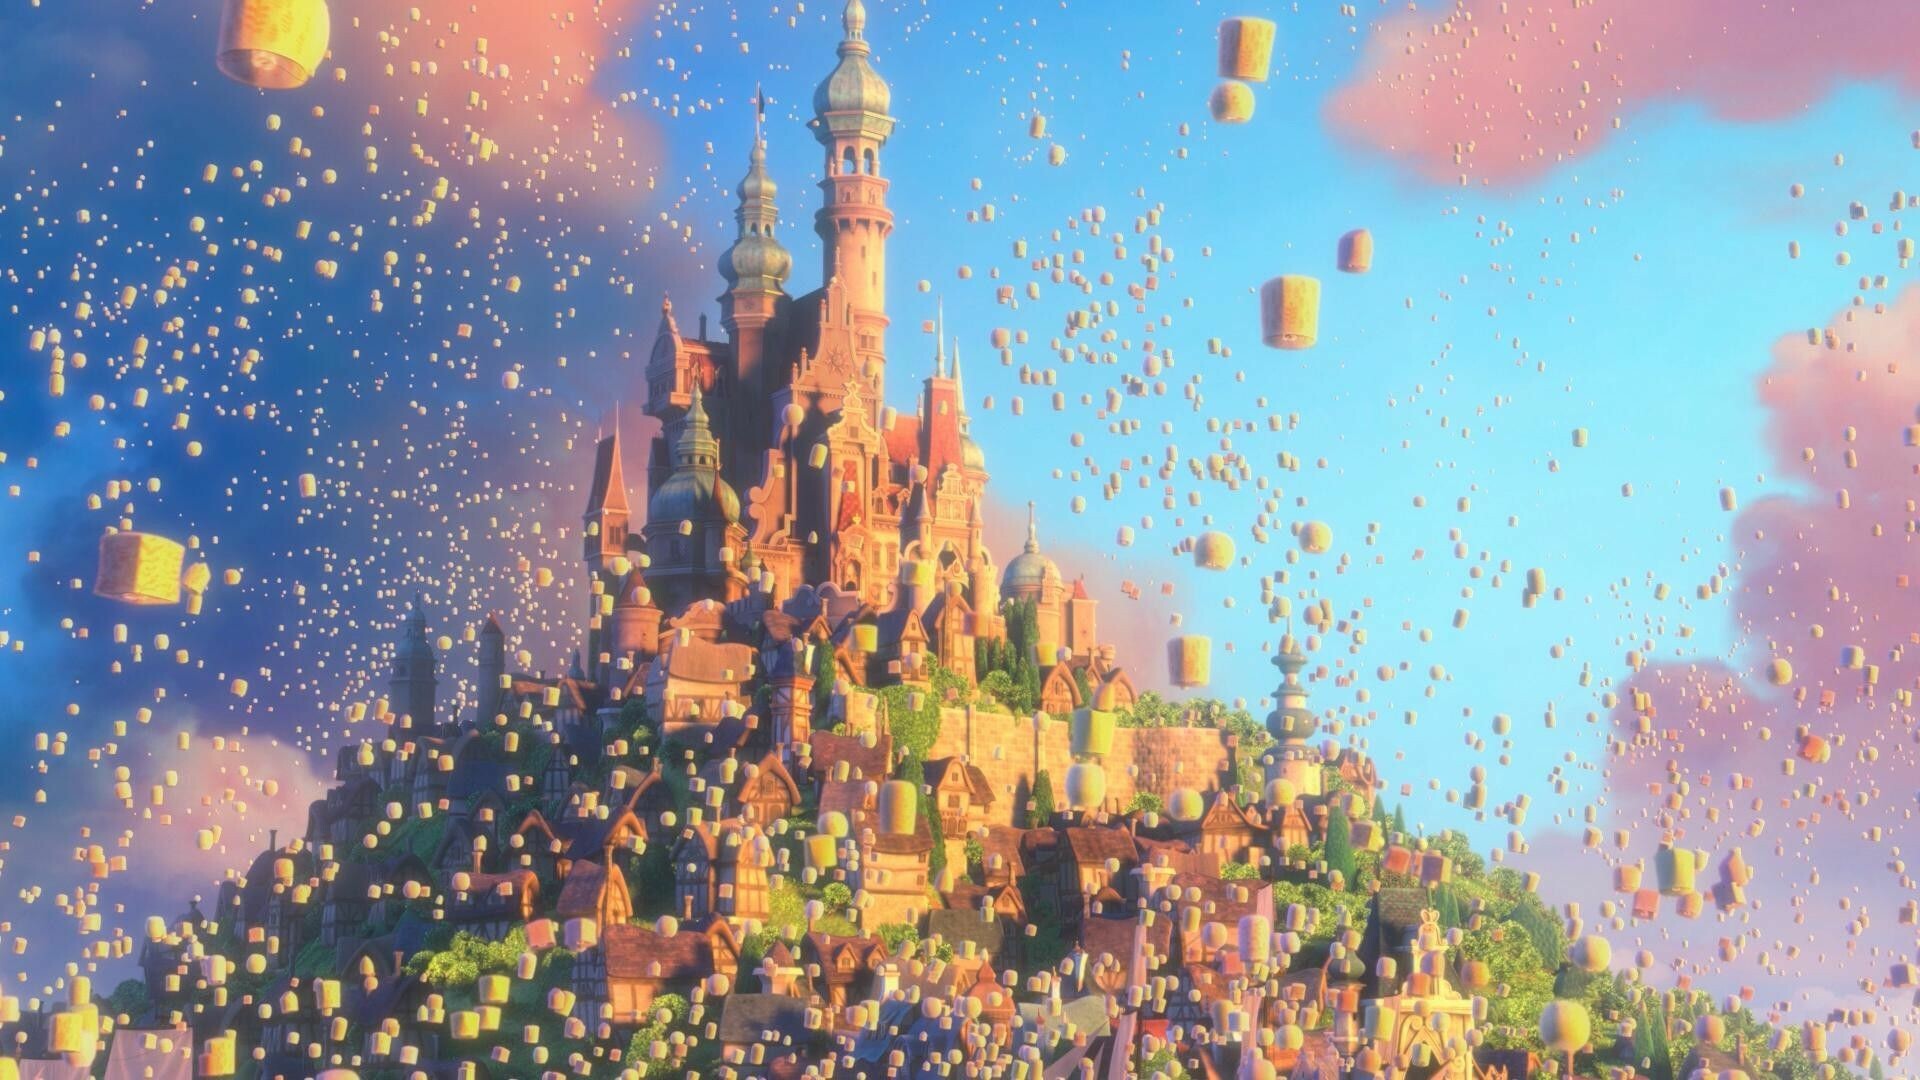 Tangled: Corona Castle, Located in the center of a city on an island and is the home of King Frederic, Queen Arianna, their daughter Rapunzel. 1920x1080 Full HD Wallpaper.